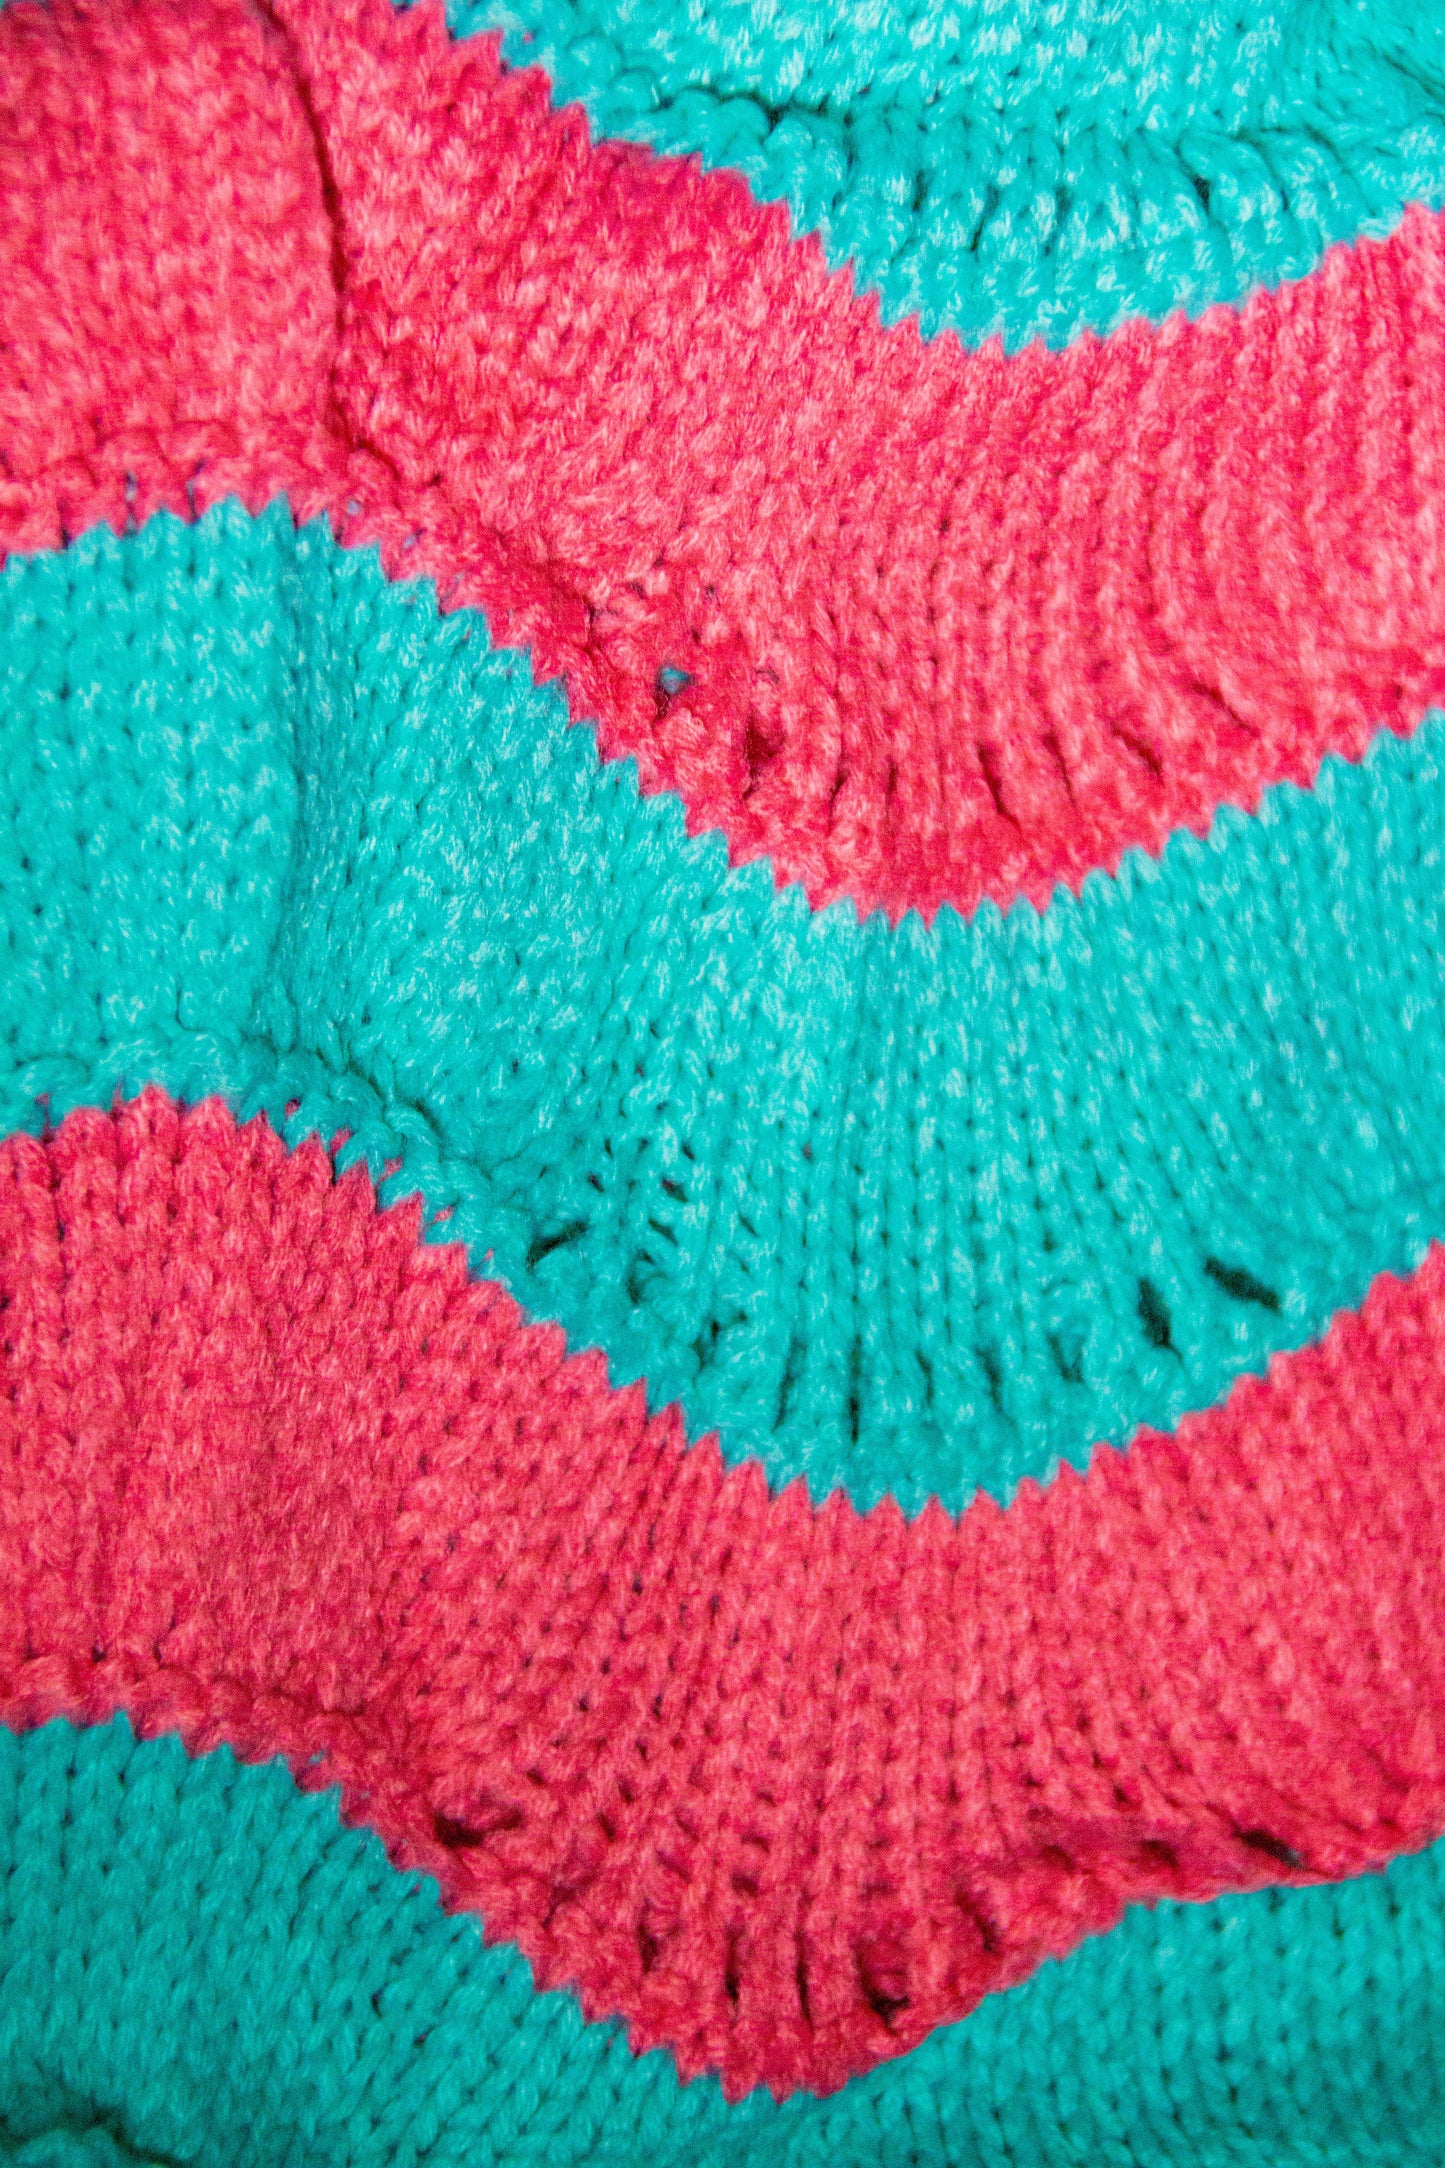 Crochet Adult/Teens Mermaid Blanket with Tail Pink-Turquois